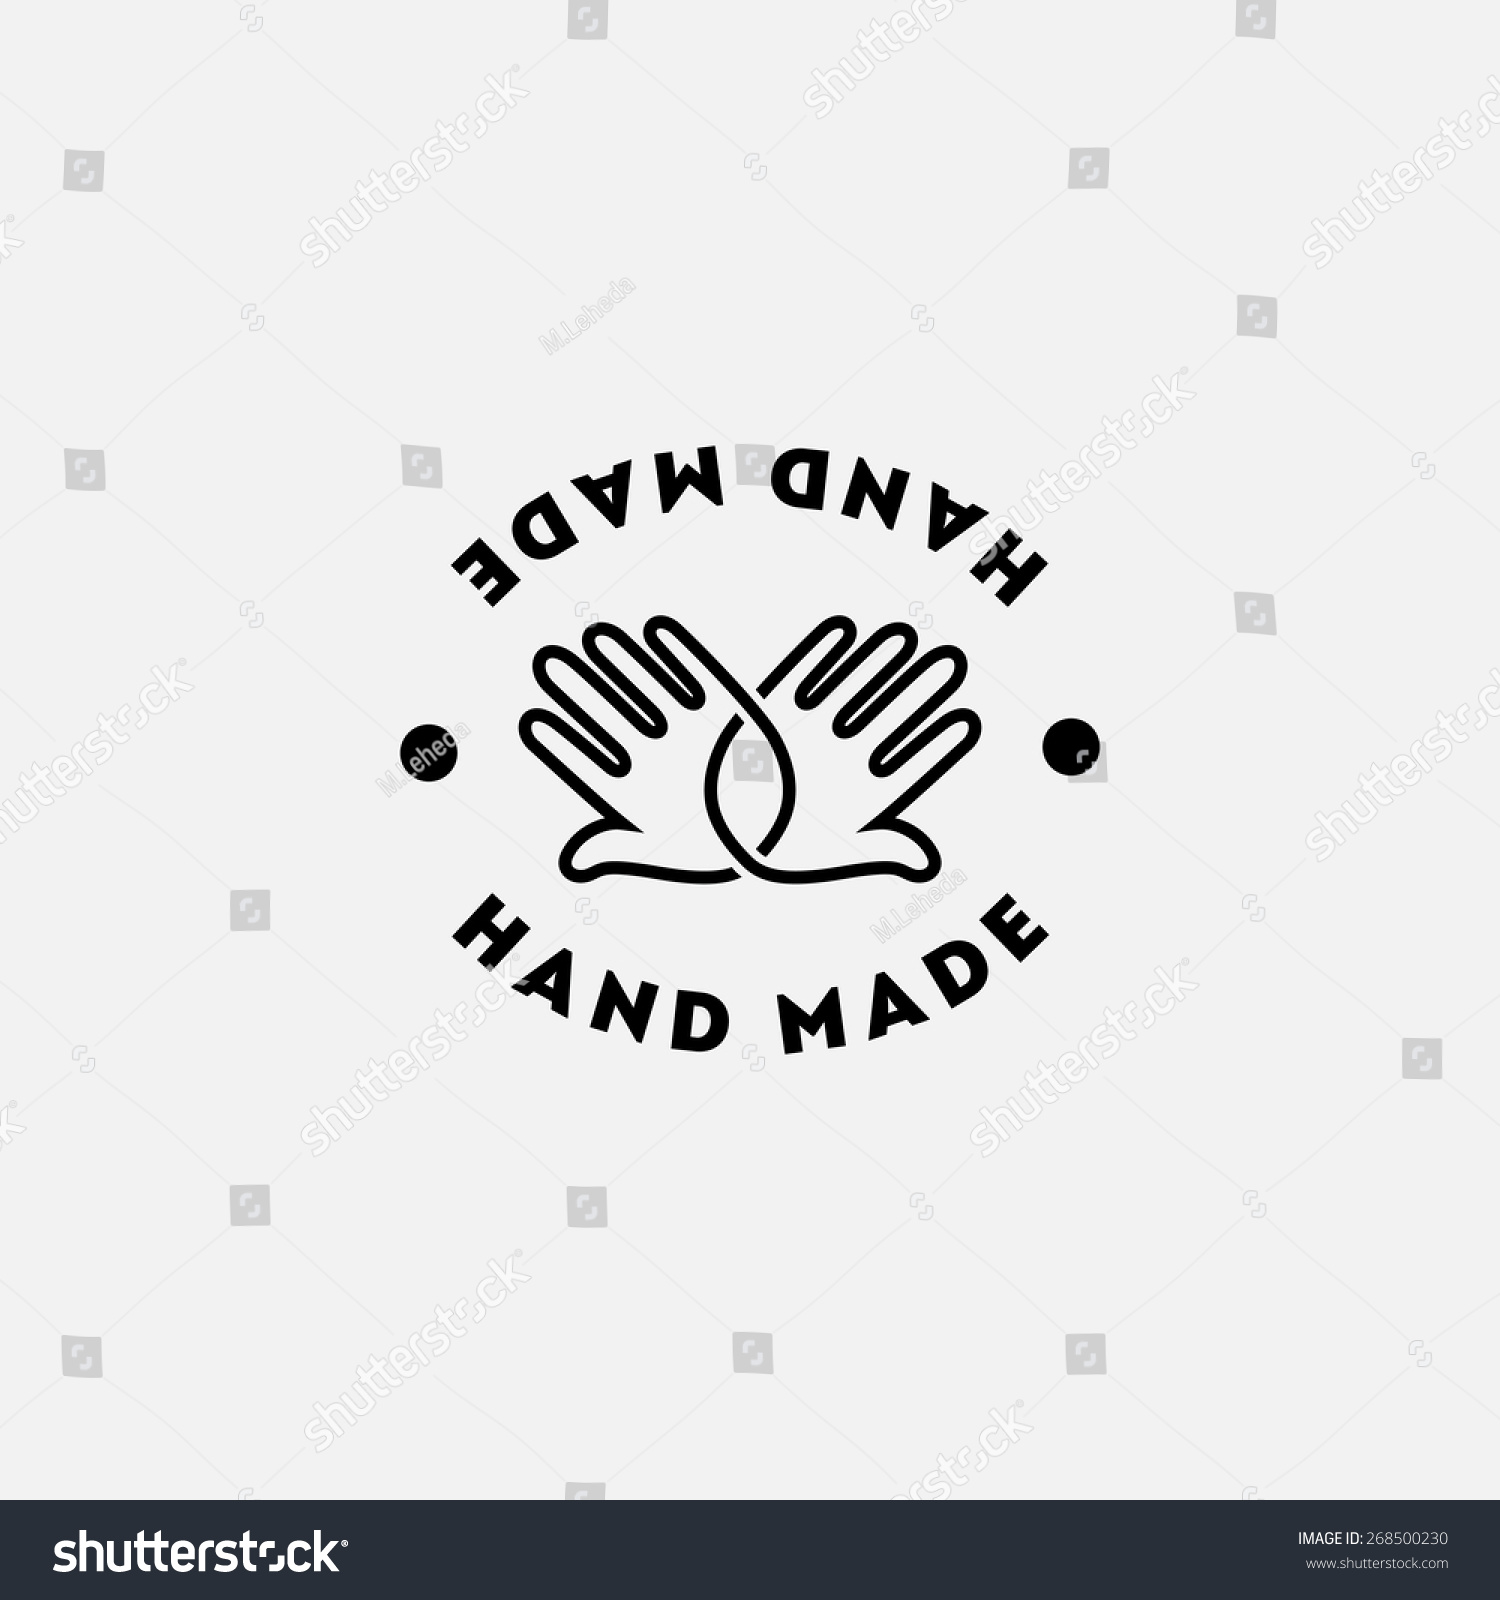 Label Design Template Two Hands Handmade Stock Vector (Royalty Free ...